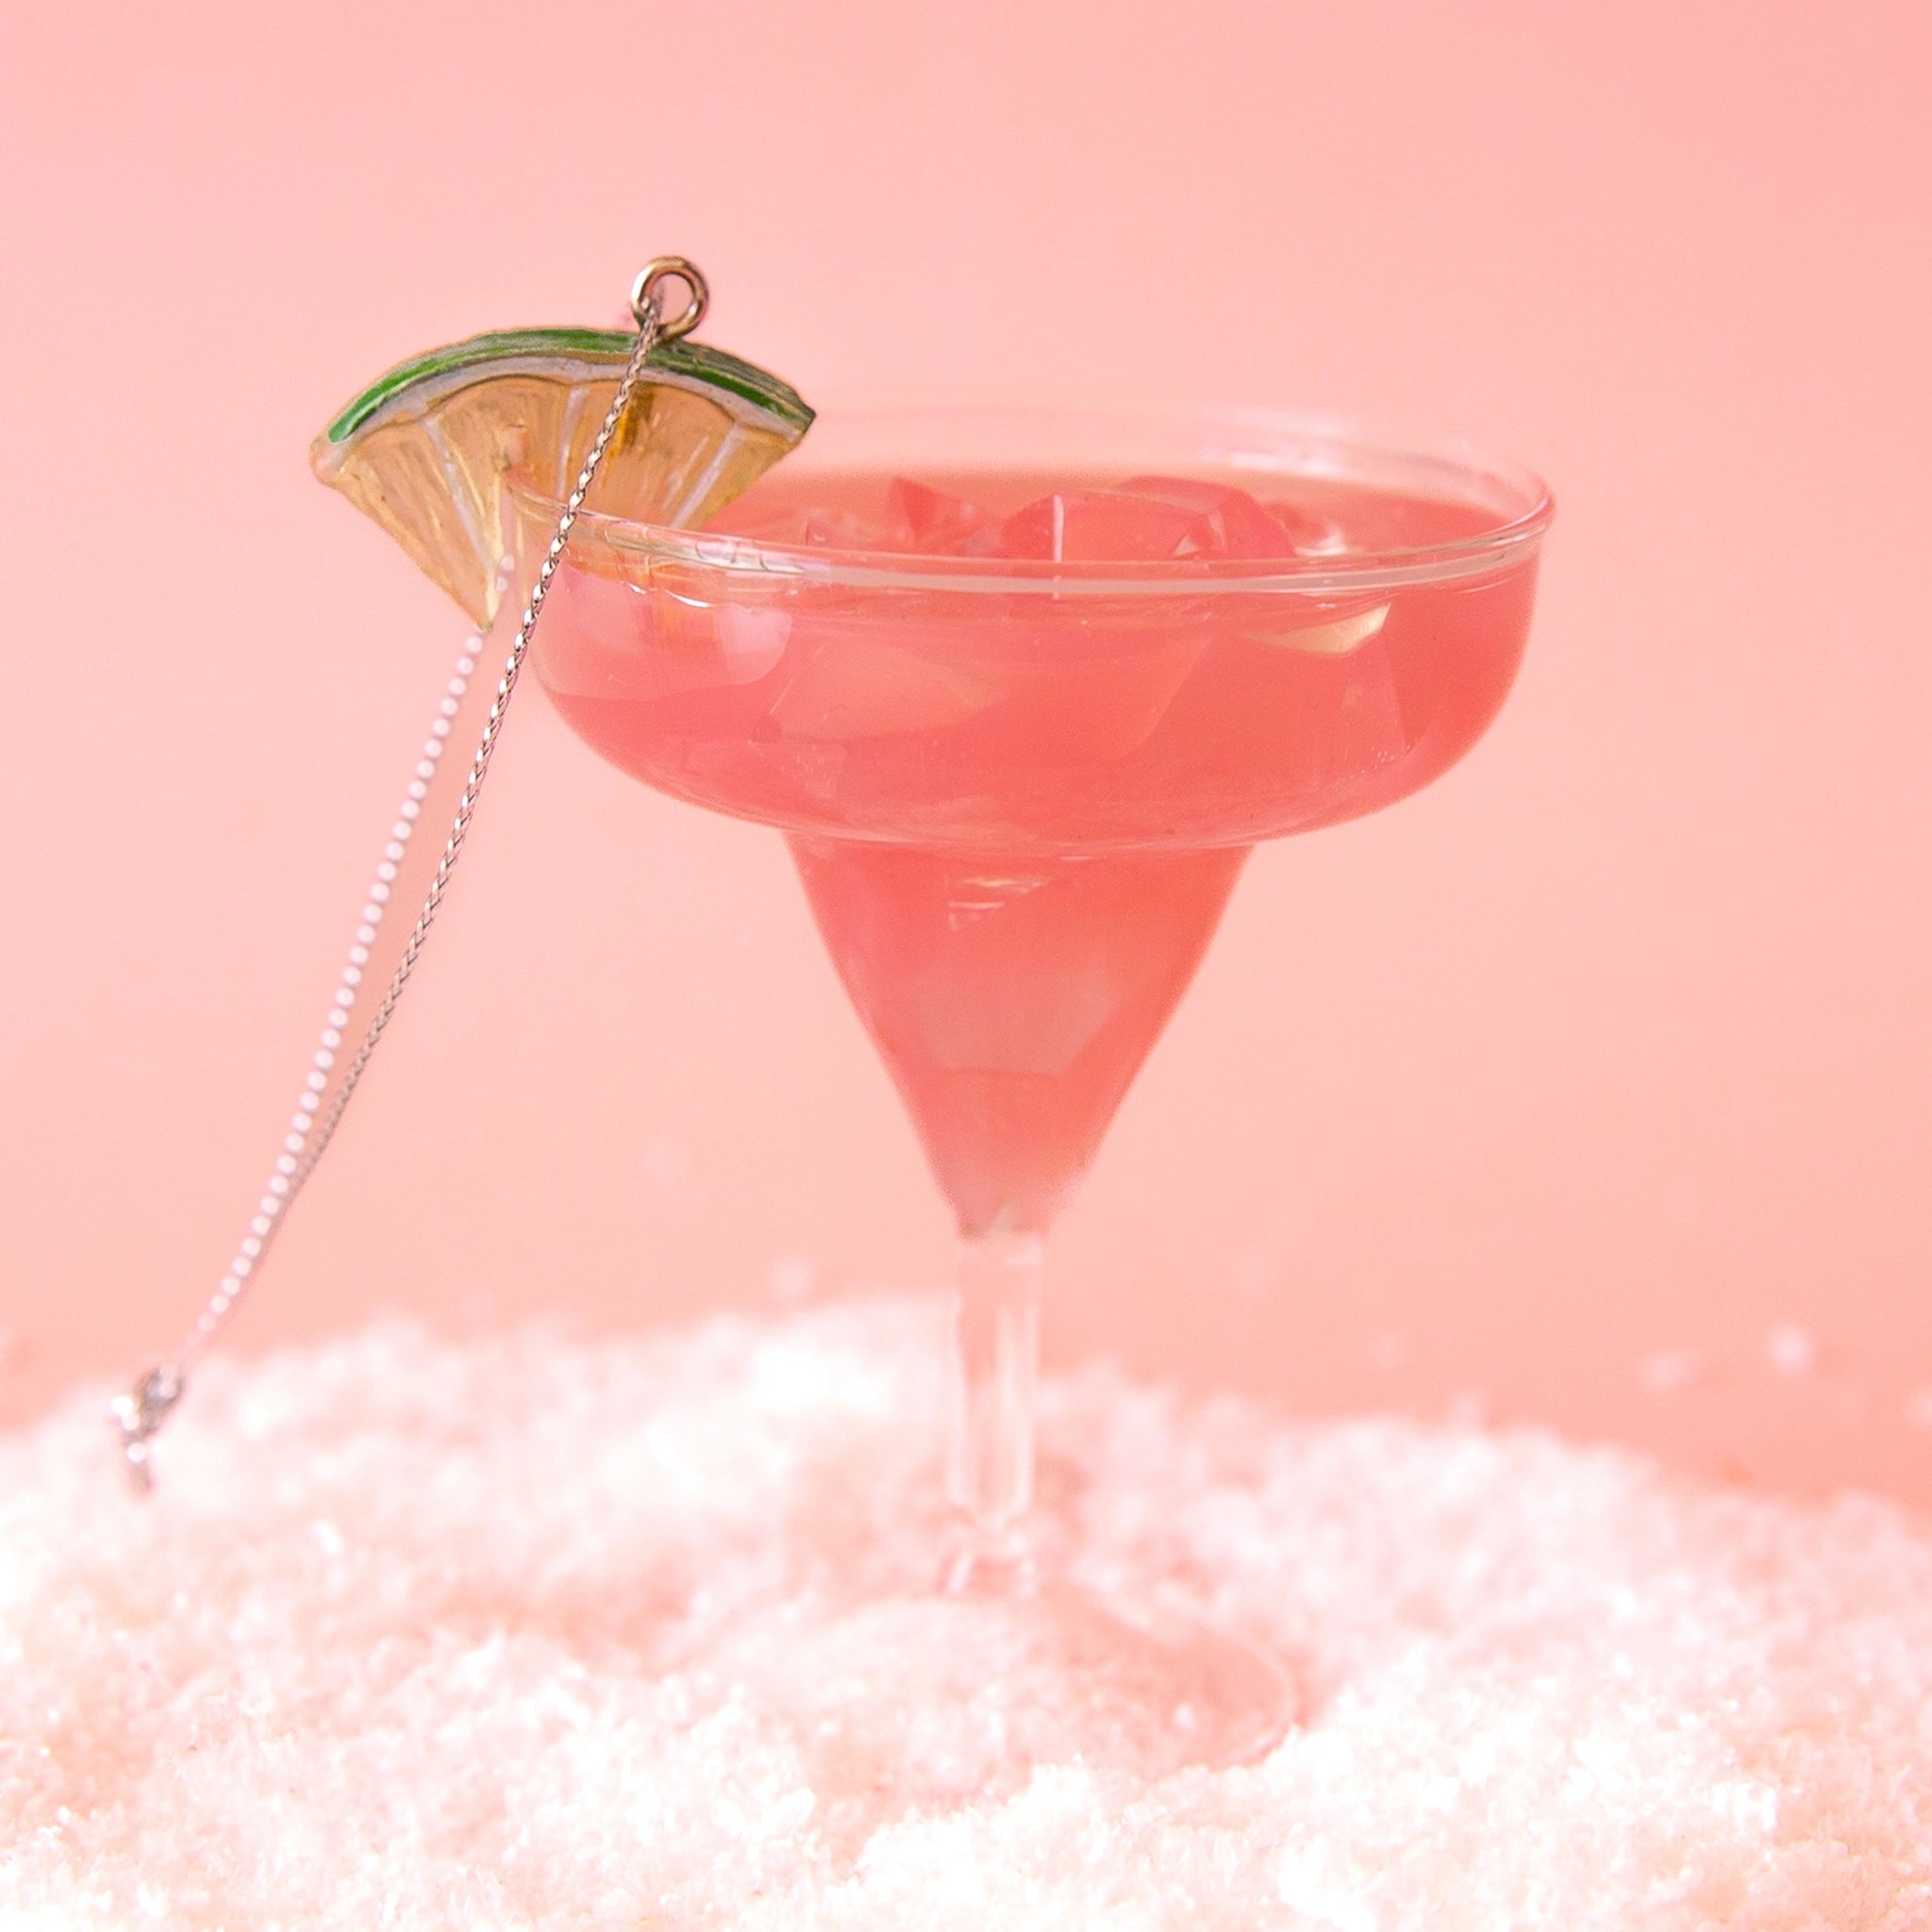 On a pink snowy background is a glass ornament in the shape of a strawberry margarita with a green and gold lime on the rim.